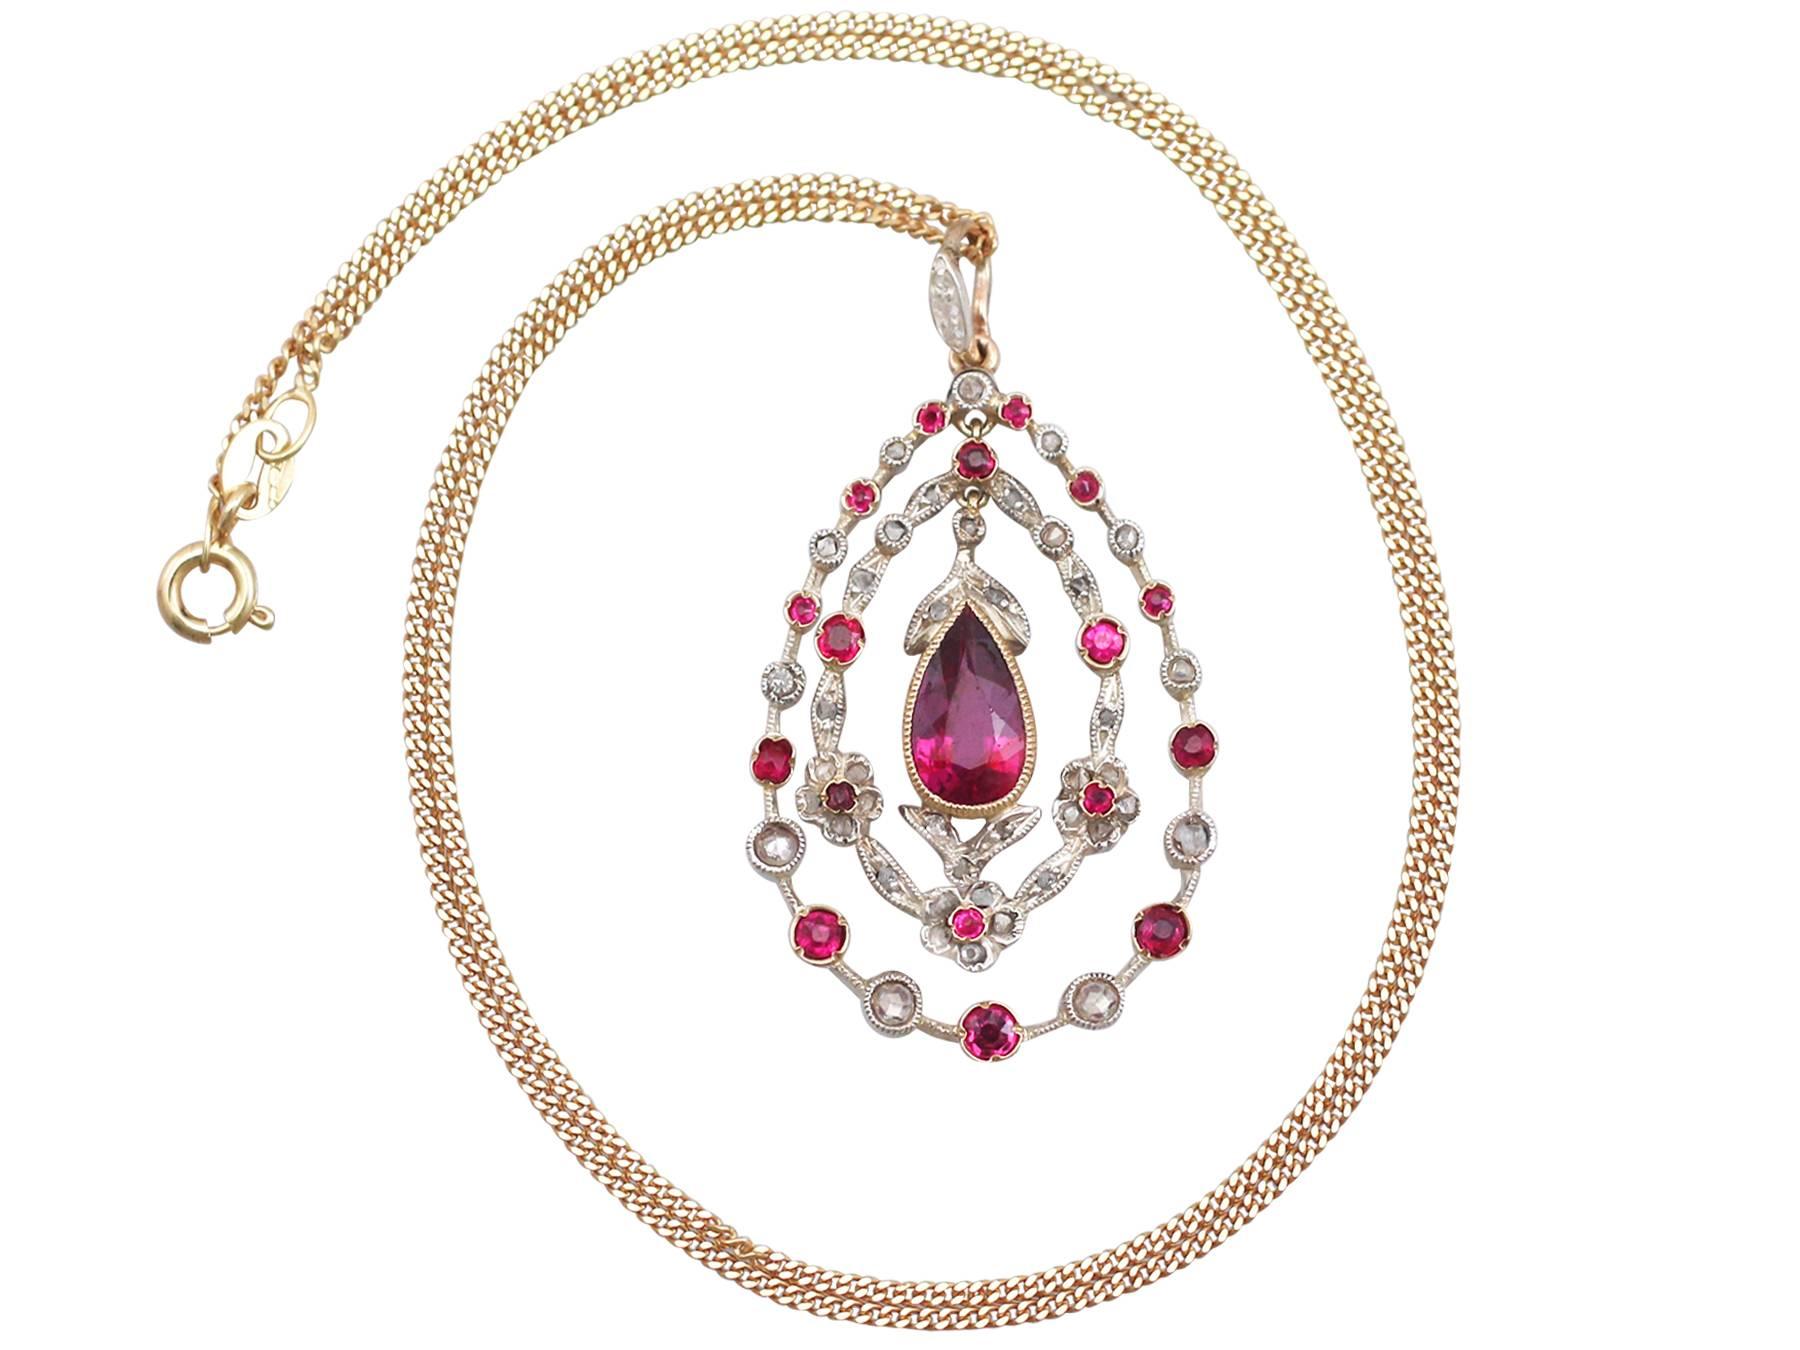 A stunning antique 1.88 Ct ruby and 0.43 Ct diamond, 15k yellow gold and silver set pendant; part of our diverse antique jewelry and estate jewelry collections.

This stunning, fine and impressive antique ruby and diamond pendant has been crafted in